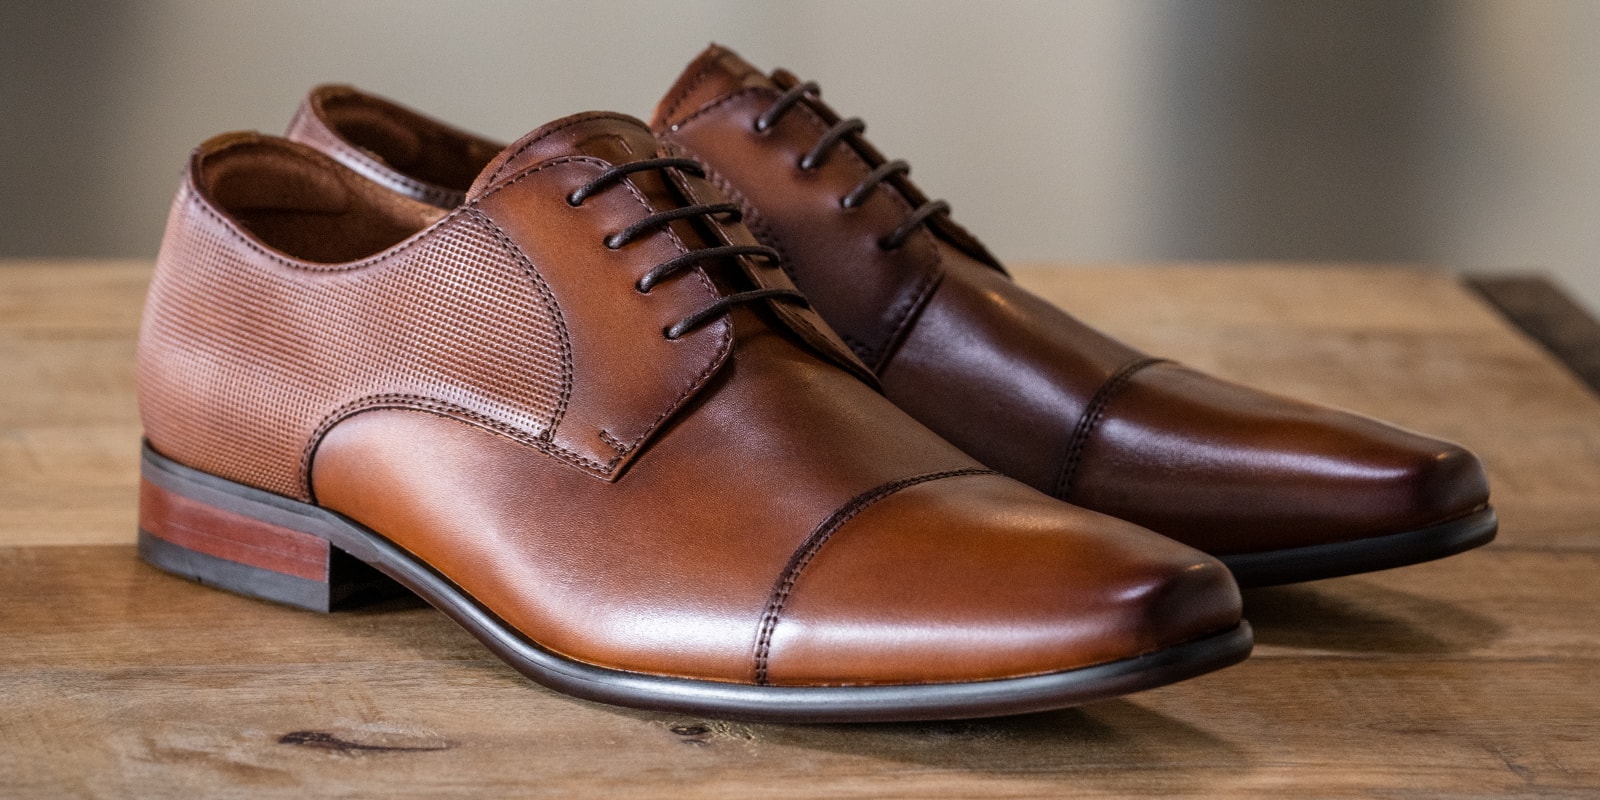 18 Best Dress Shoes For Men: Different Styles For Any Occasion 2023 |  FashionBeans